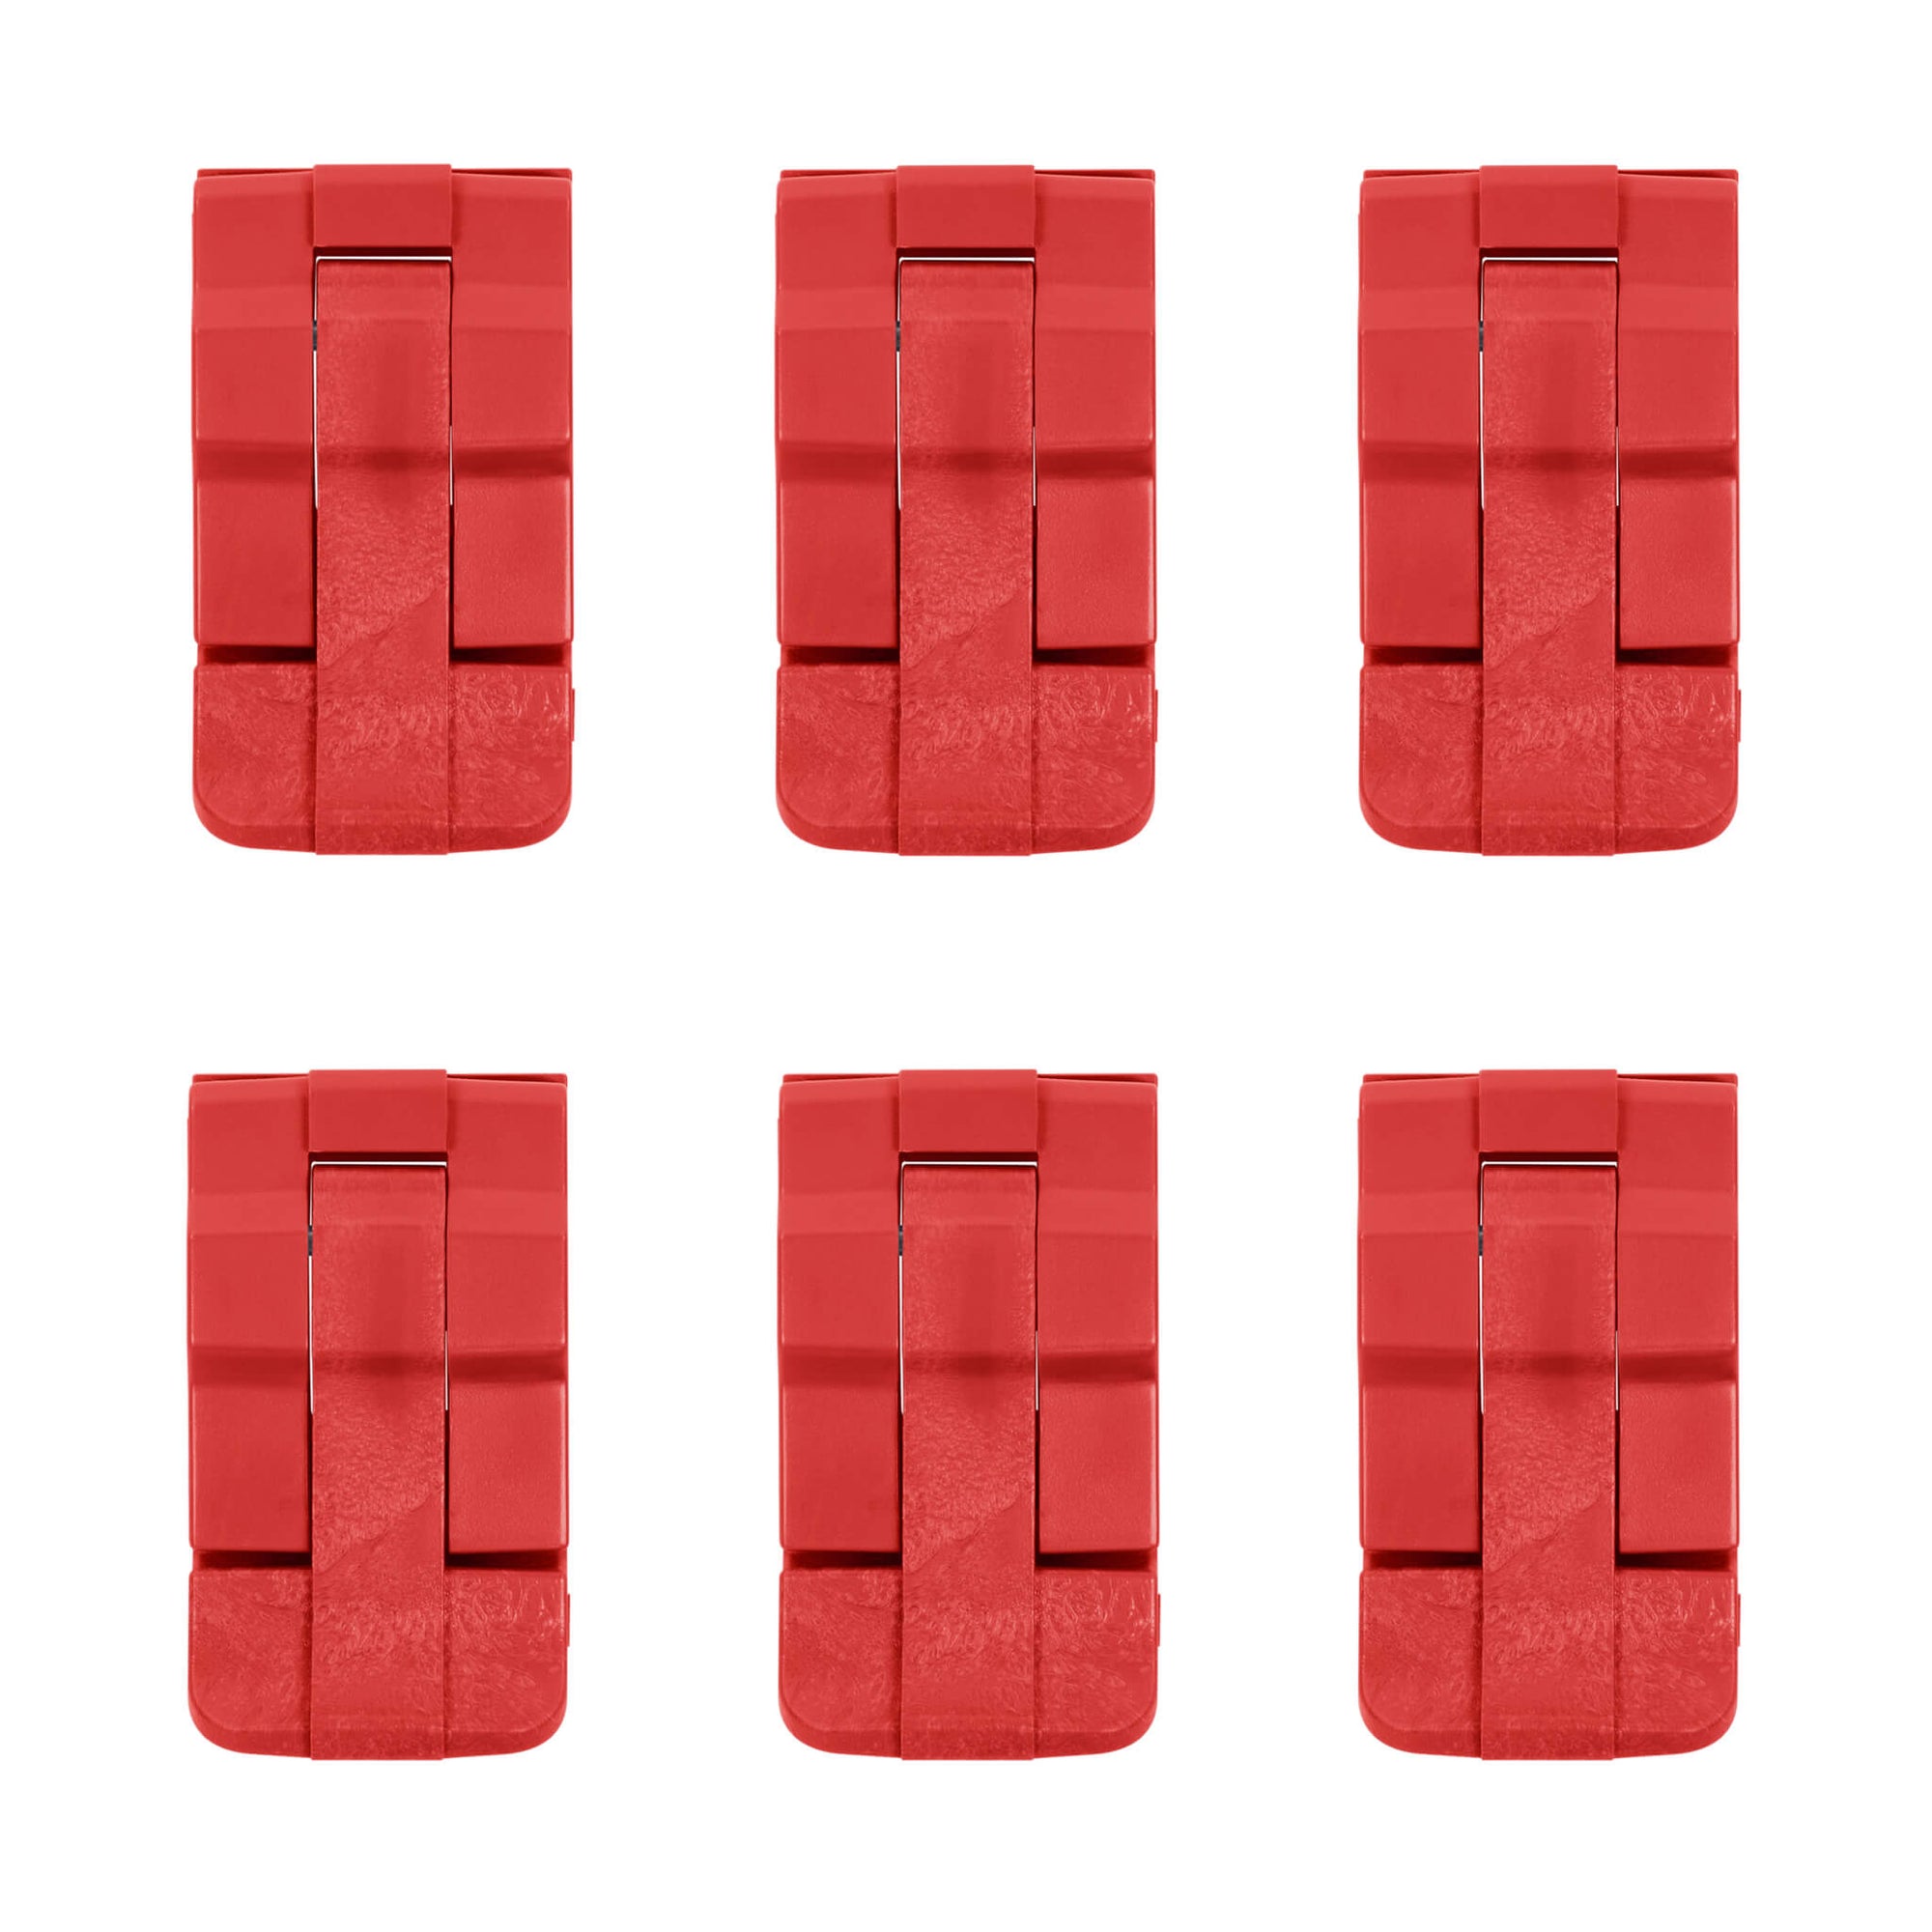 Pelican 0370 Replacement Latches, Red (Set of 6) ColorCase 